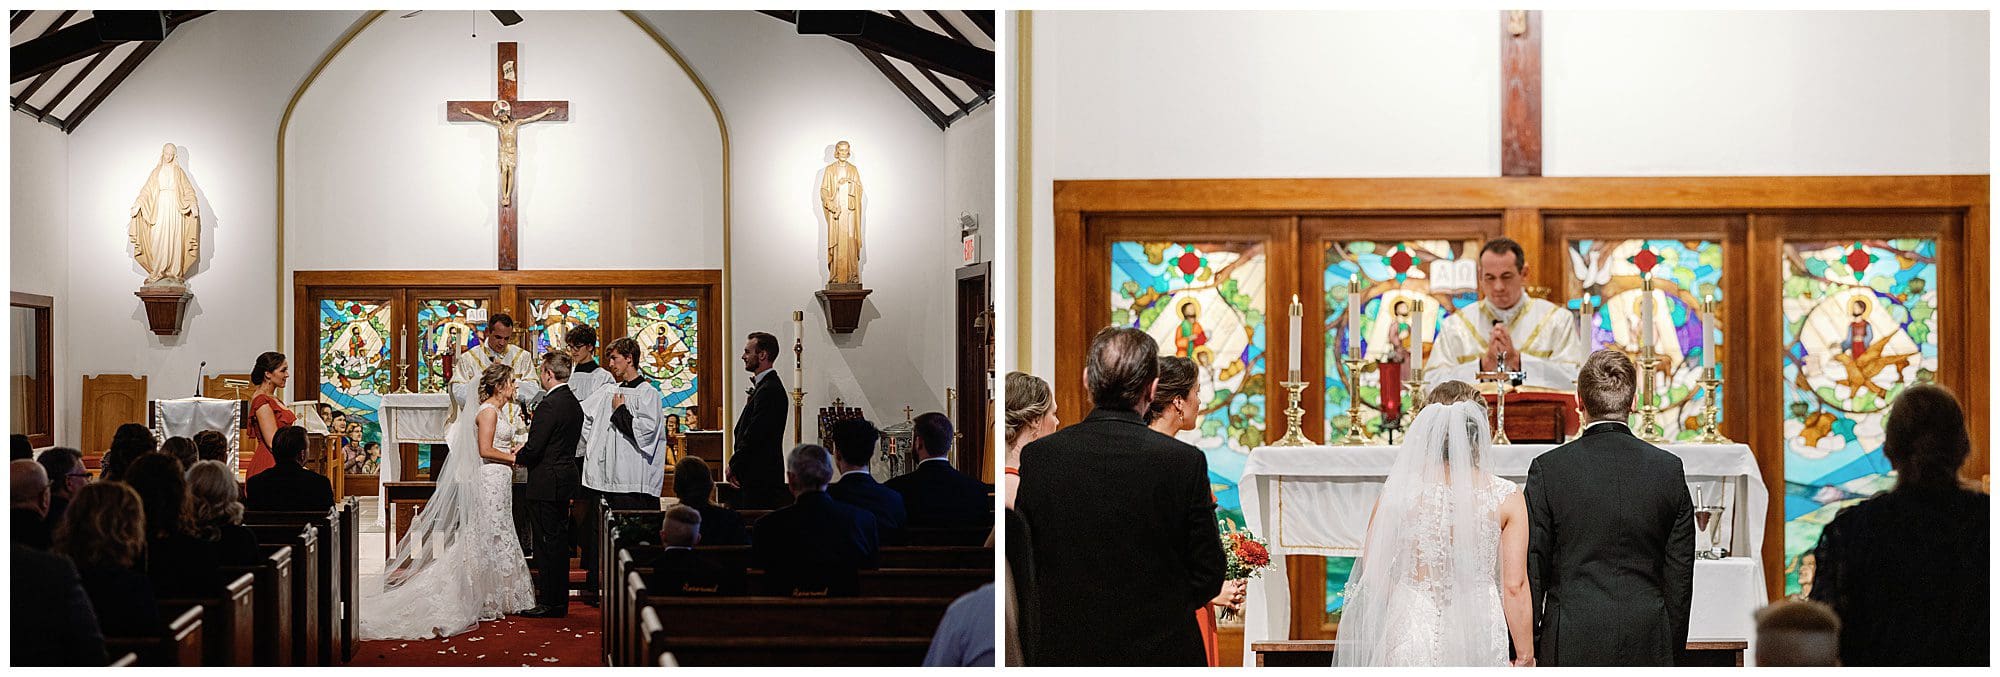 Wedding ceremony in a church with stained glass windows, featuring a bride and groom at the altar with a priest and guests watching.